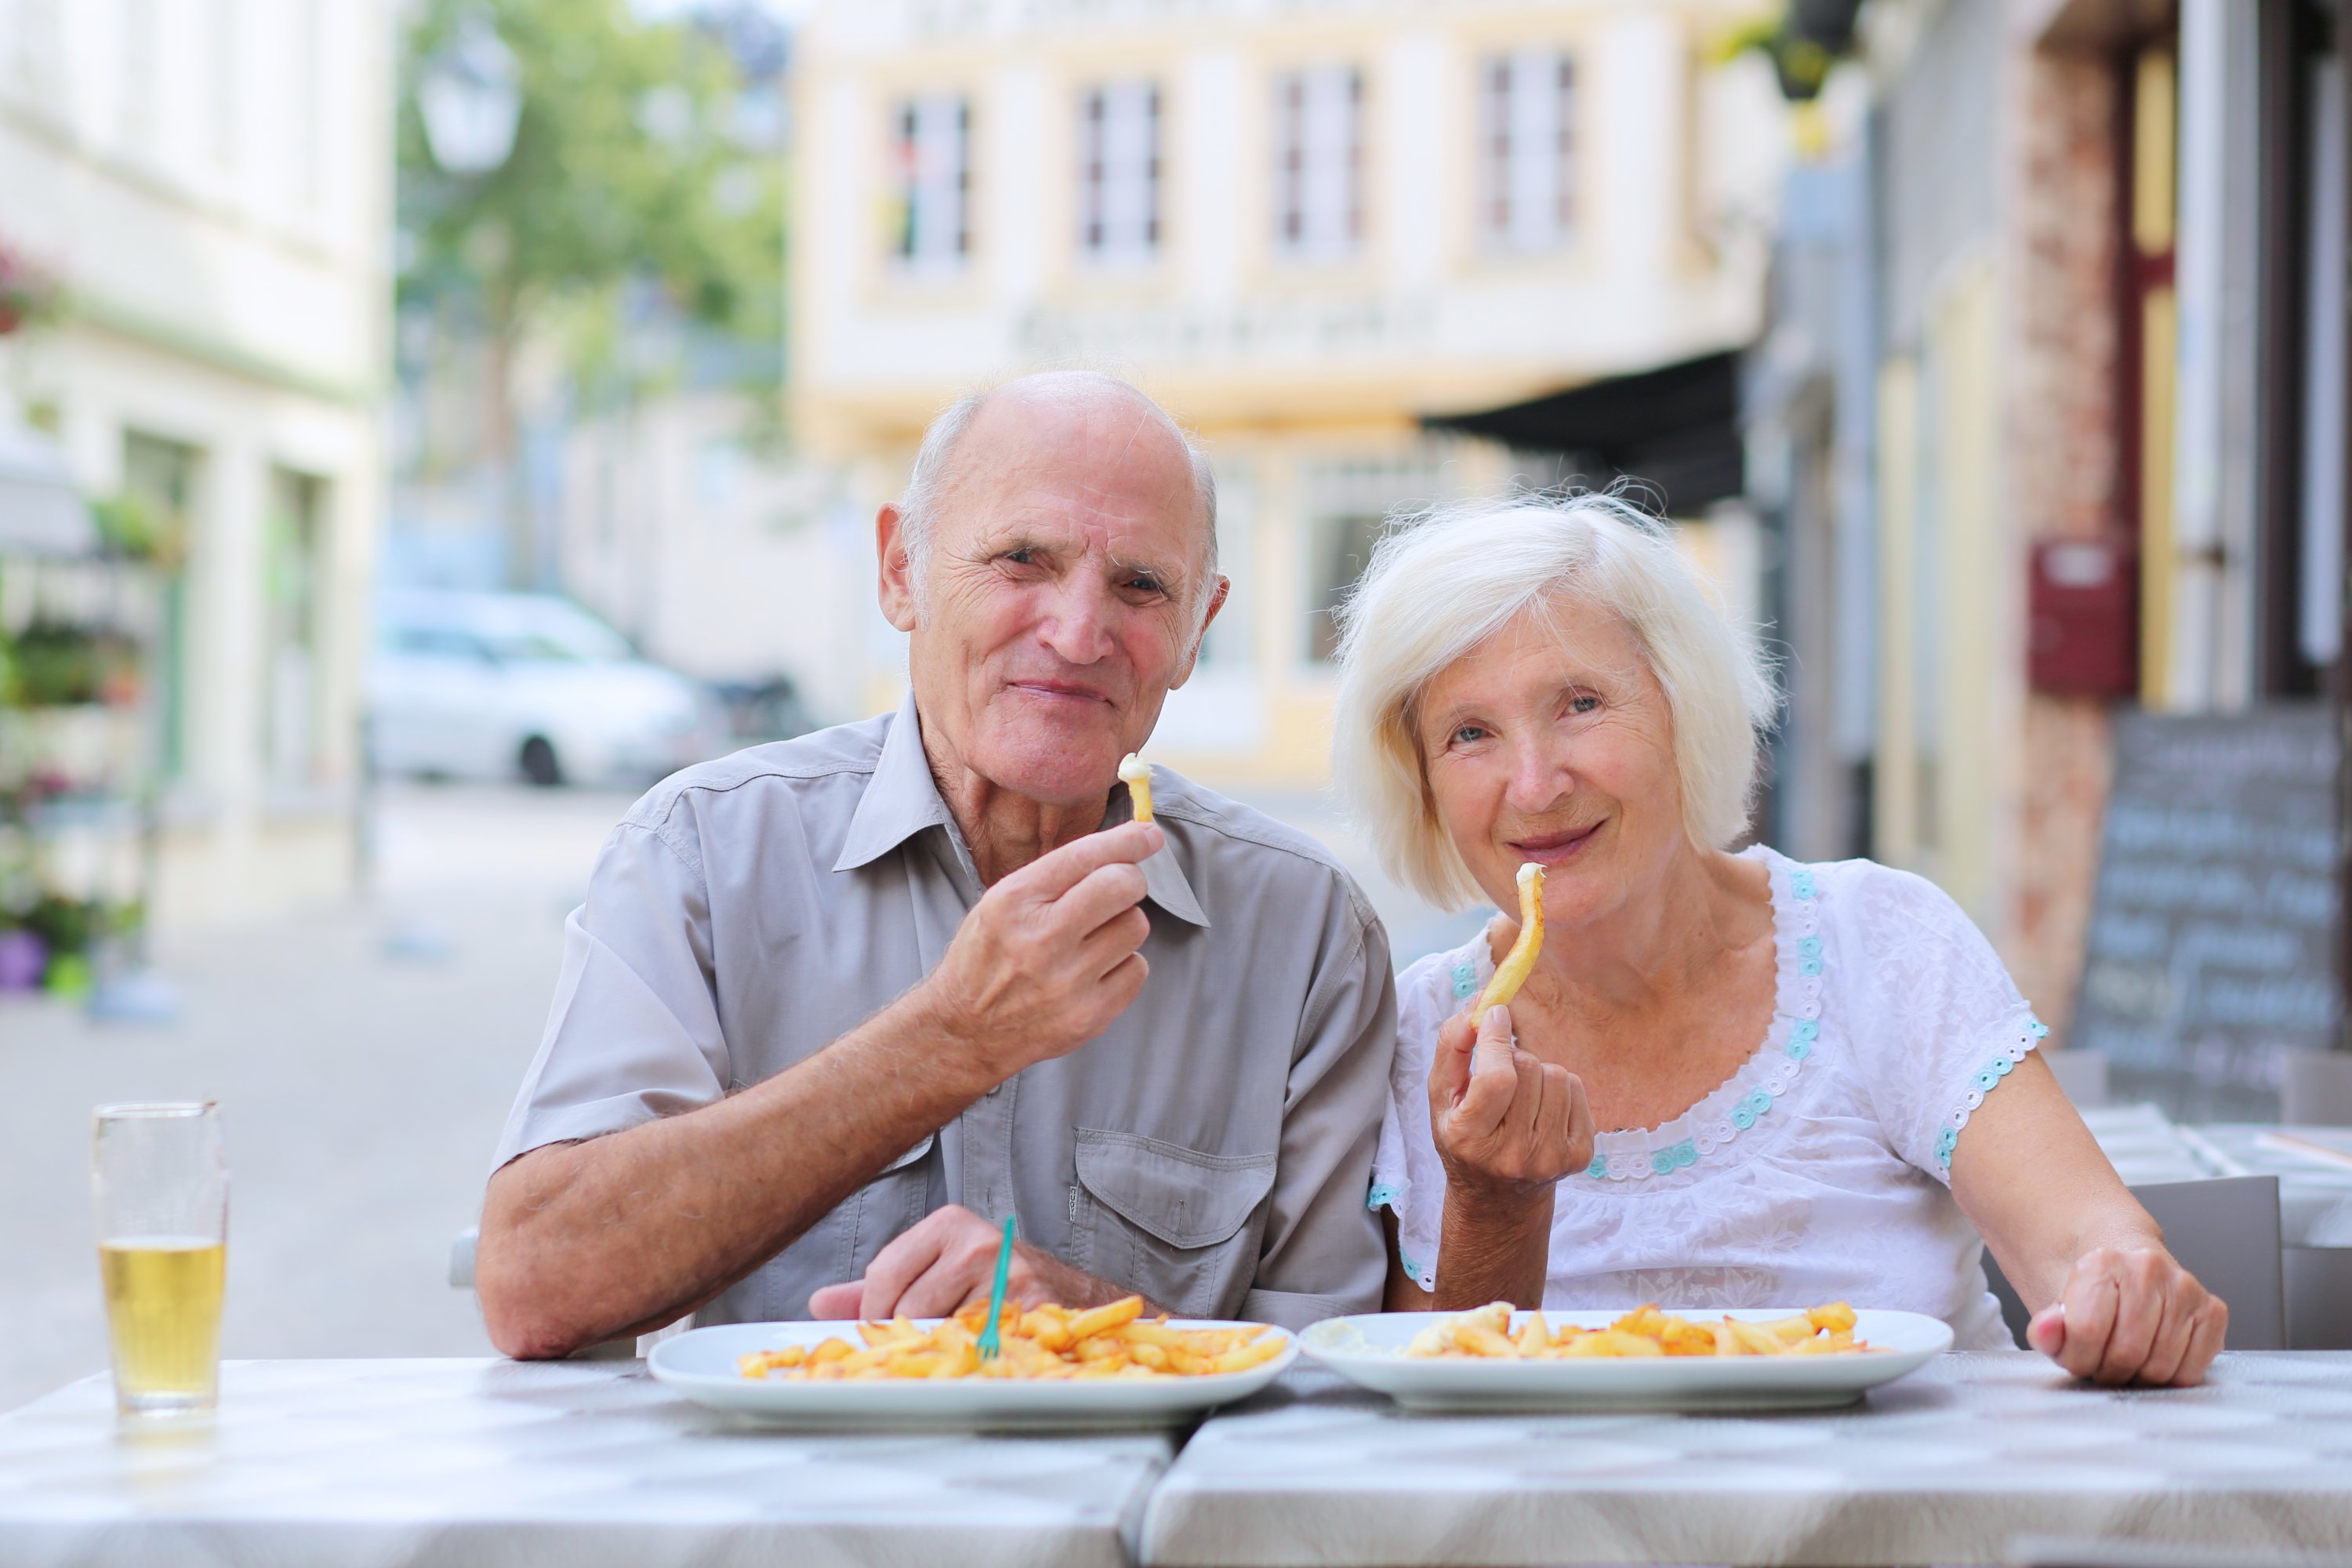 Happy active senior couple enjoying time together eating belgian french fries in outdoors street cafe on a summer day in typical European town | Photo: Shutterstock.com